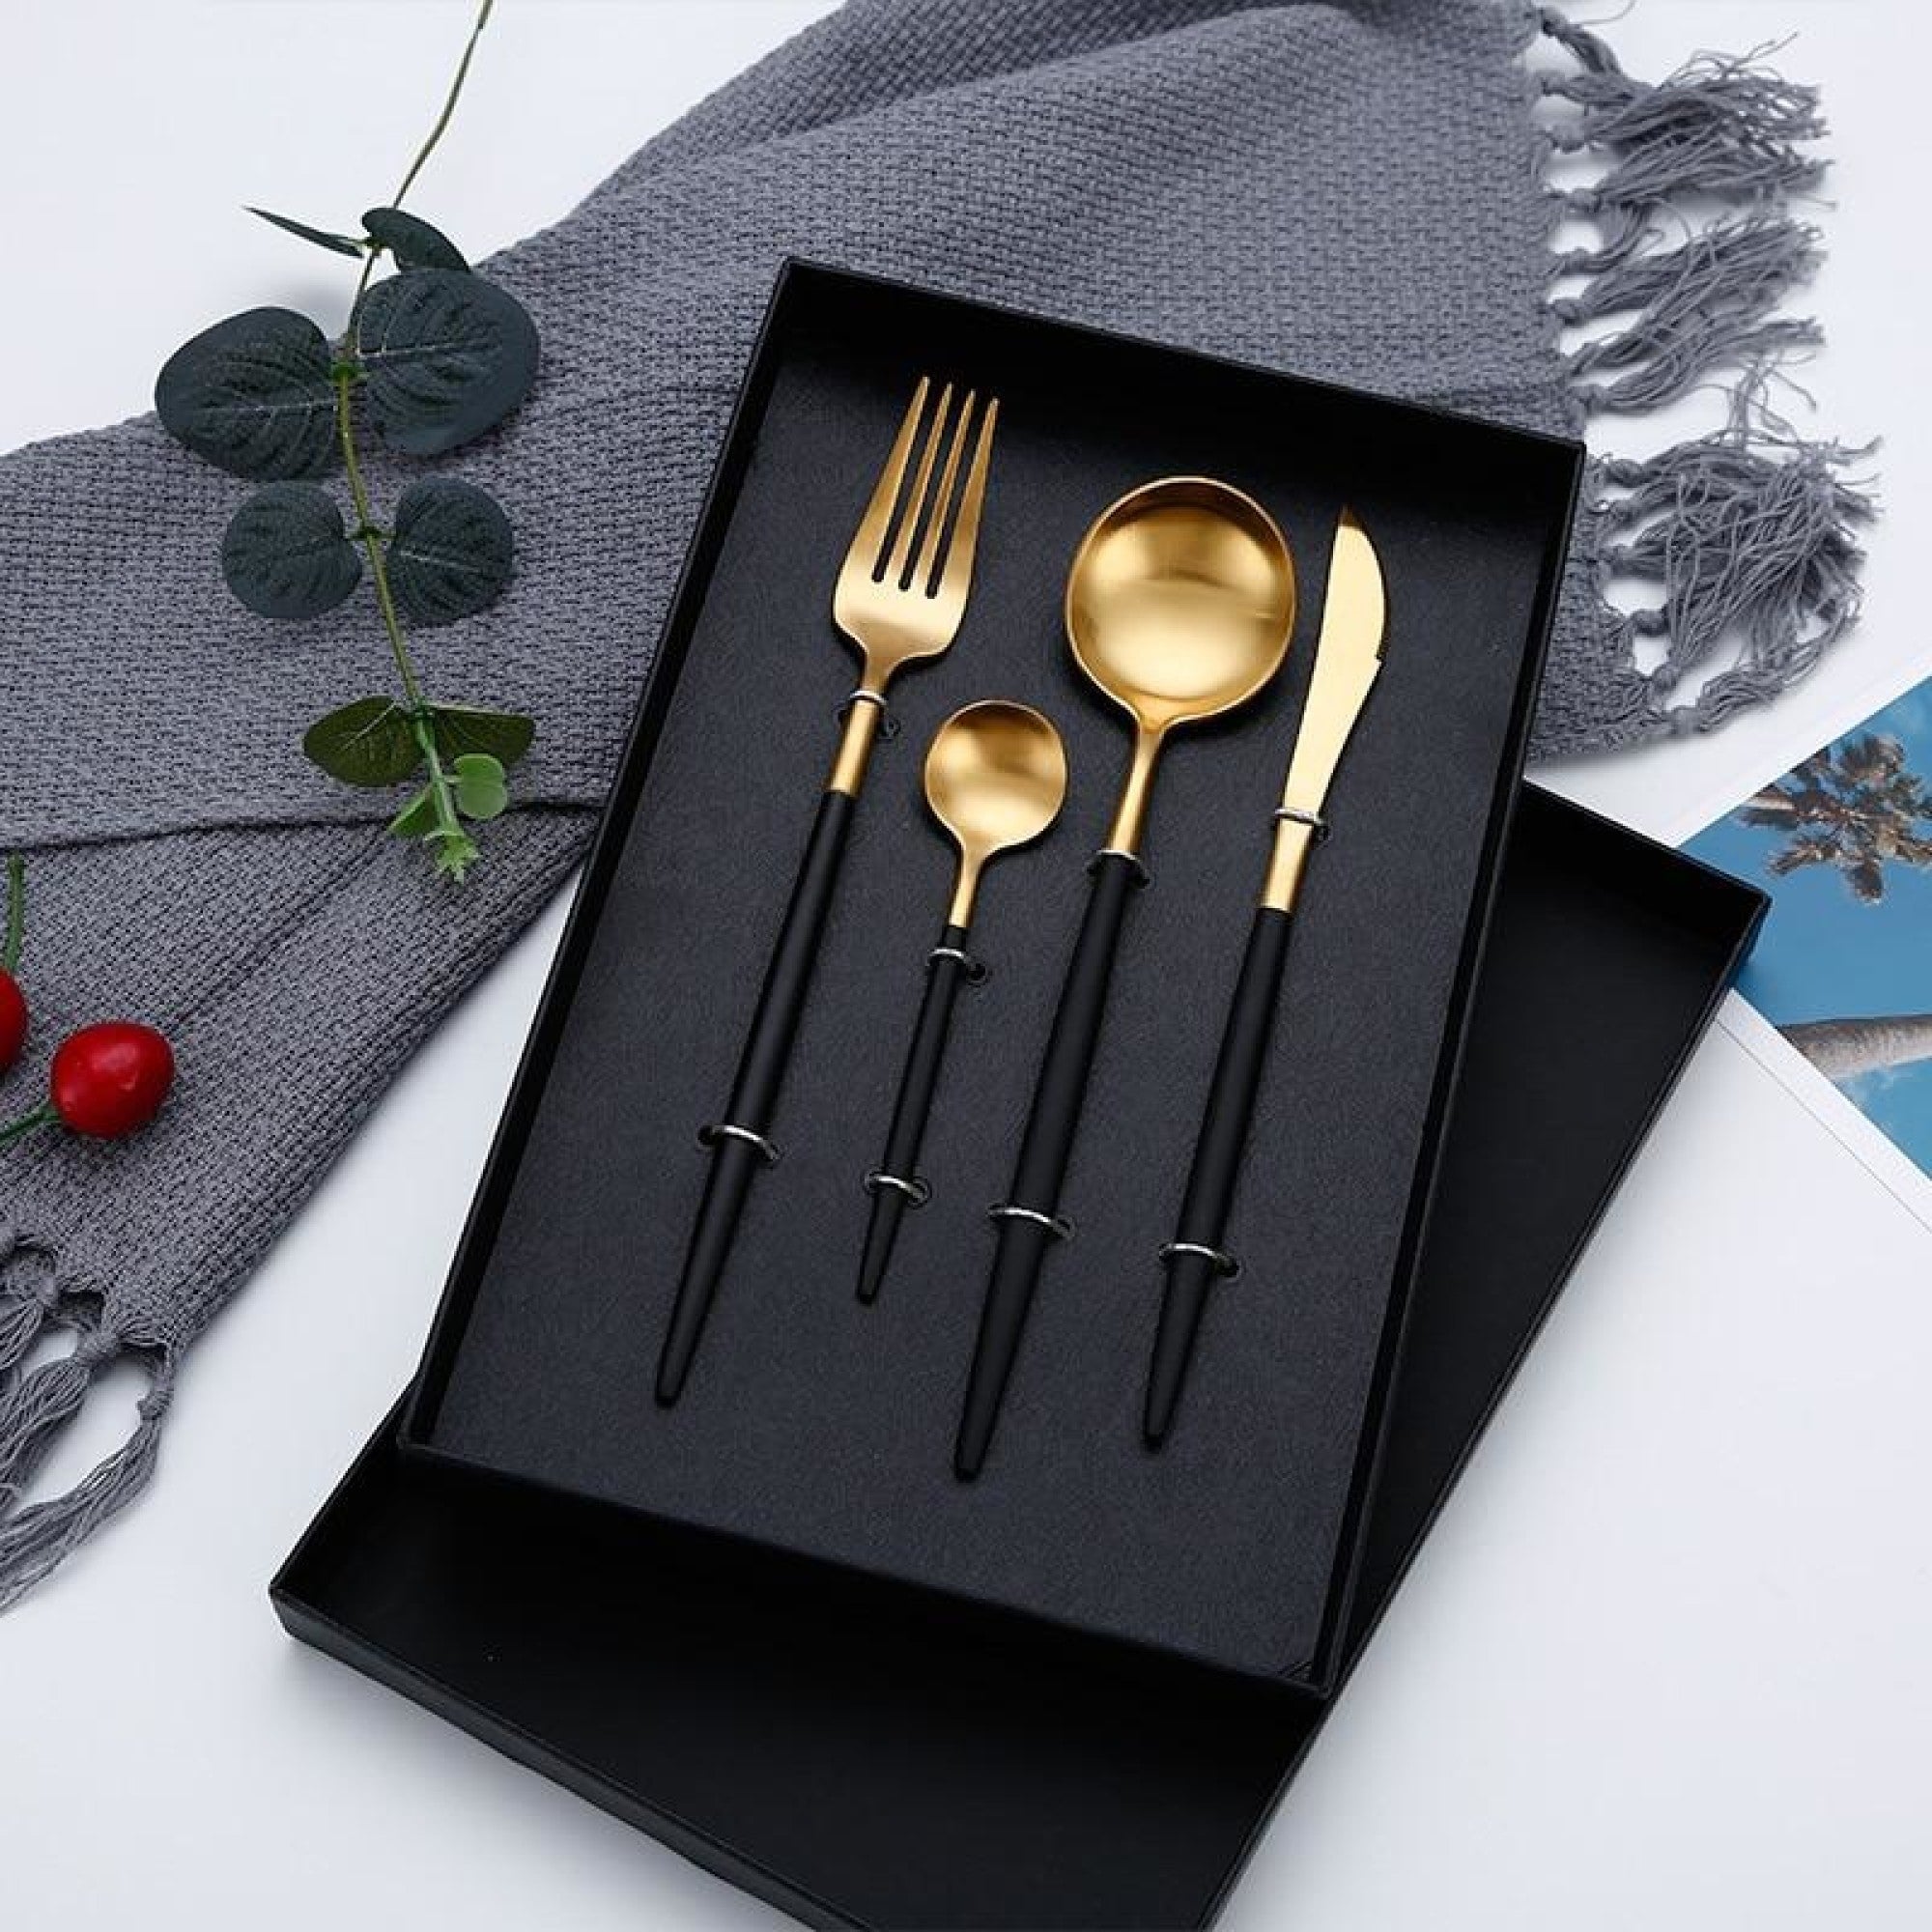 https://myaashis.com/wp-content/uploads/2022/11/Hot-Sale-Dinner-Set-Cutlery-Knives-Forks-Spoons-Wester-Kitchen-Dinnerware-Stainless-Steel-Home-Party-Tableware_0ce96cab-954c-4a8c-a1bf-7a082dae1e89.jpg